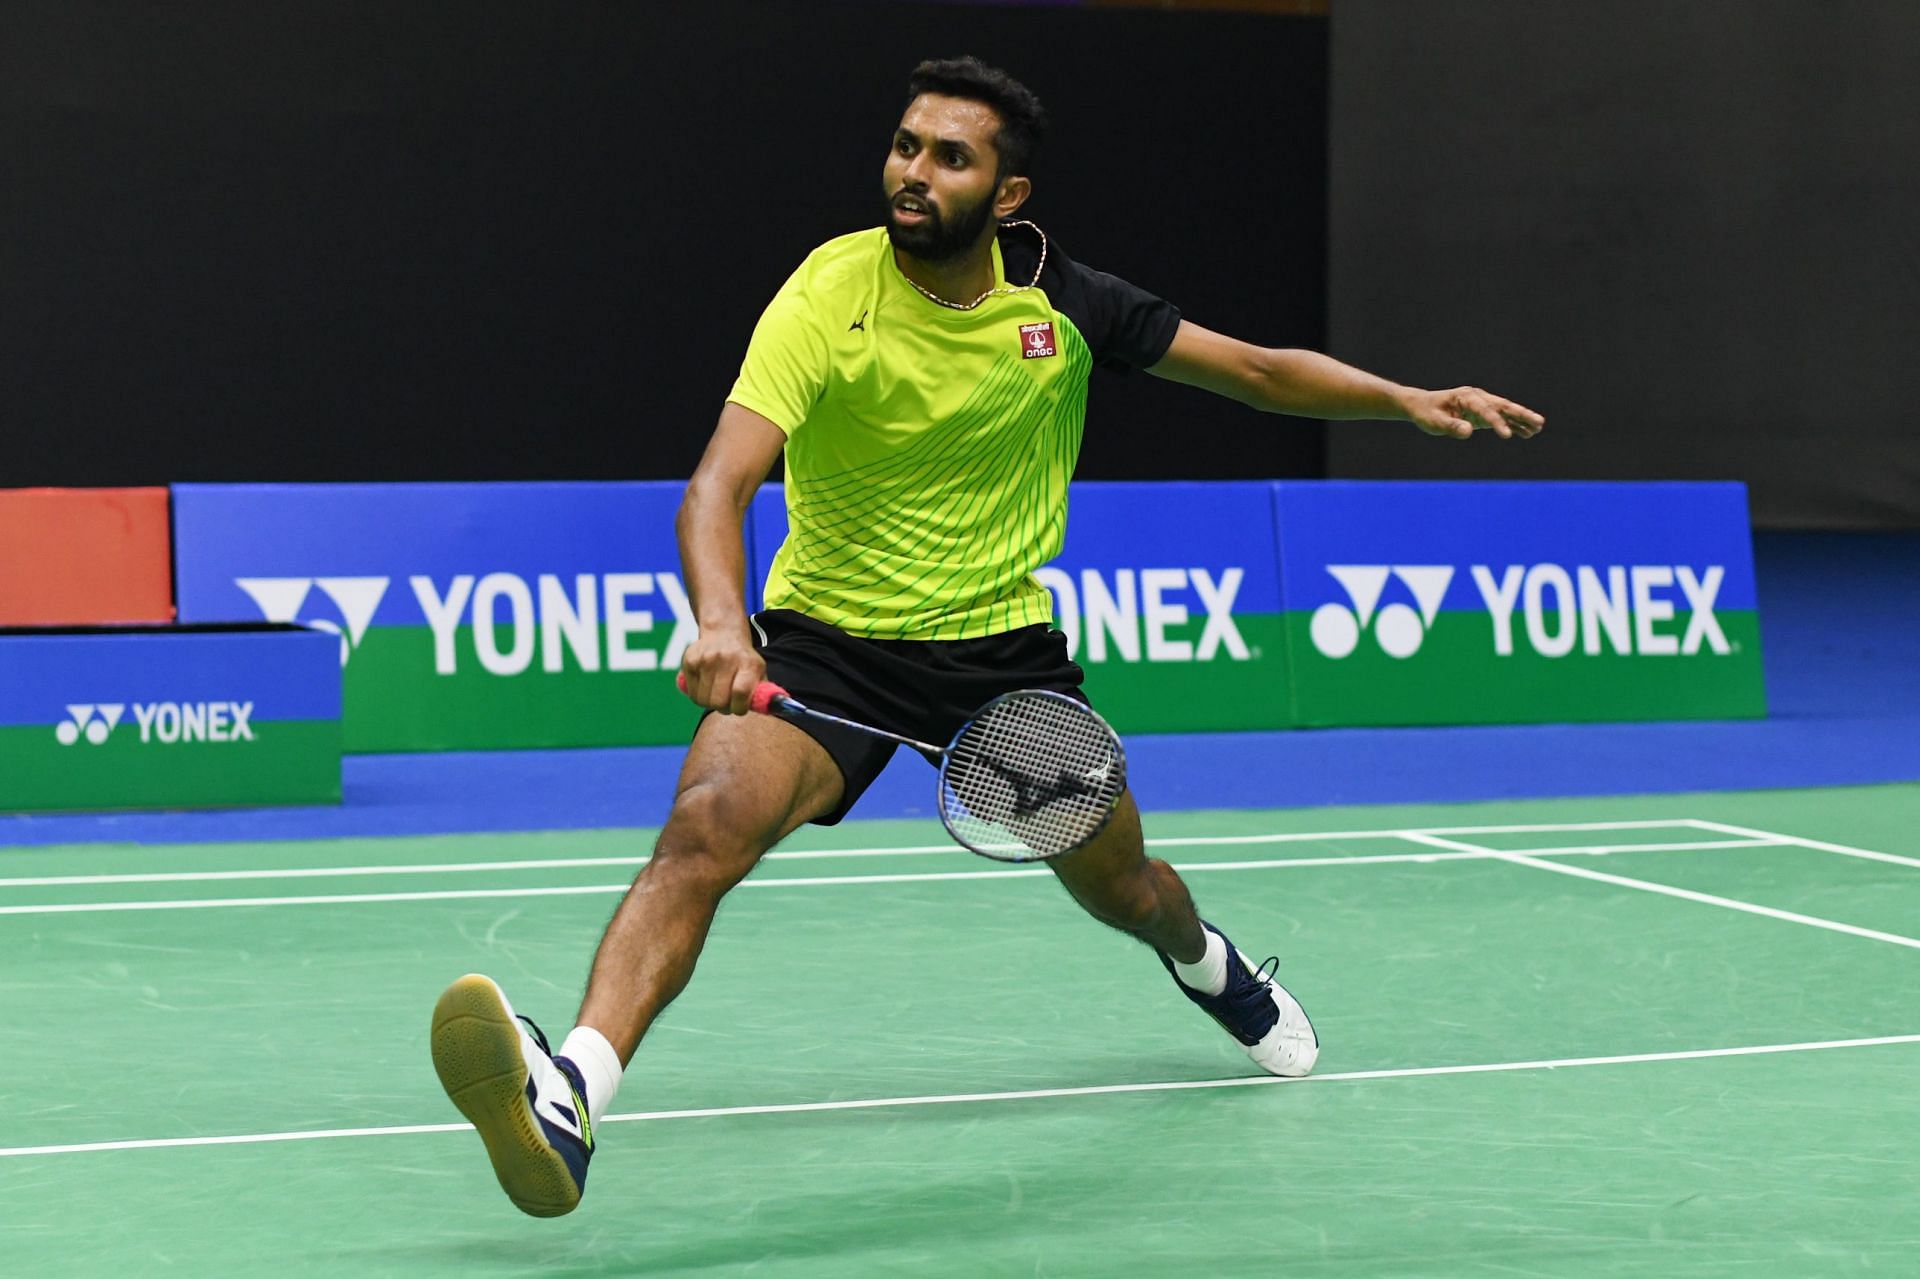 HS Prannoy beat world No. 13 Rasmus Gemke of Denmark 13-21, 21-9, 21-12 to help India upset former champions Denmark 3-2 in the Thomas Cup semi-finals on Friday. (Pic credit: BAI)